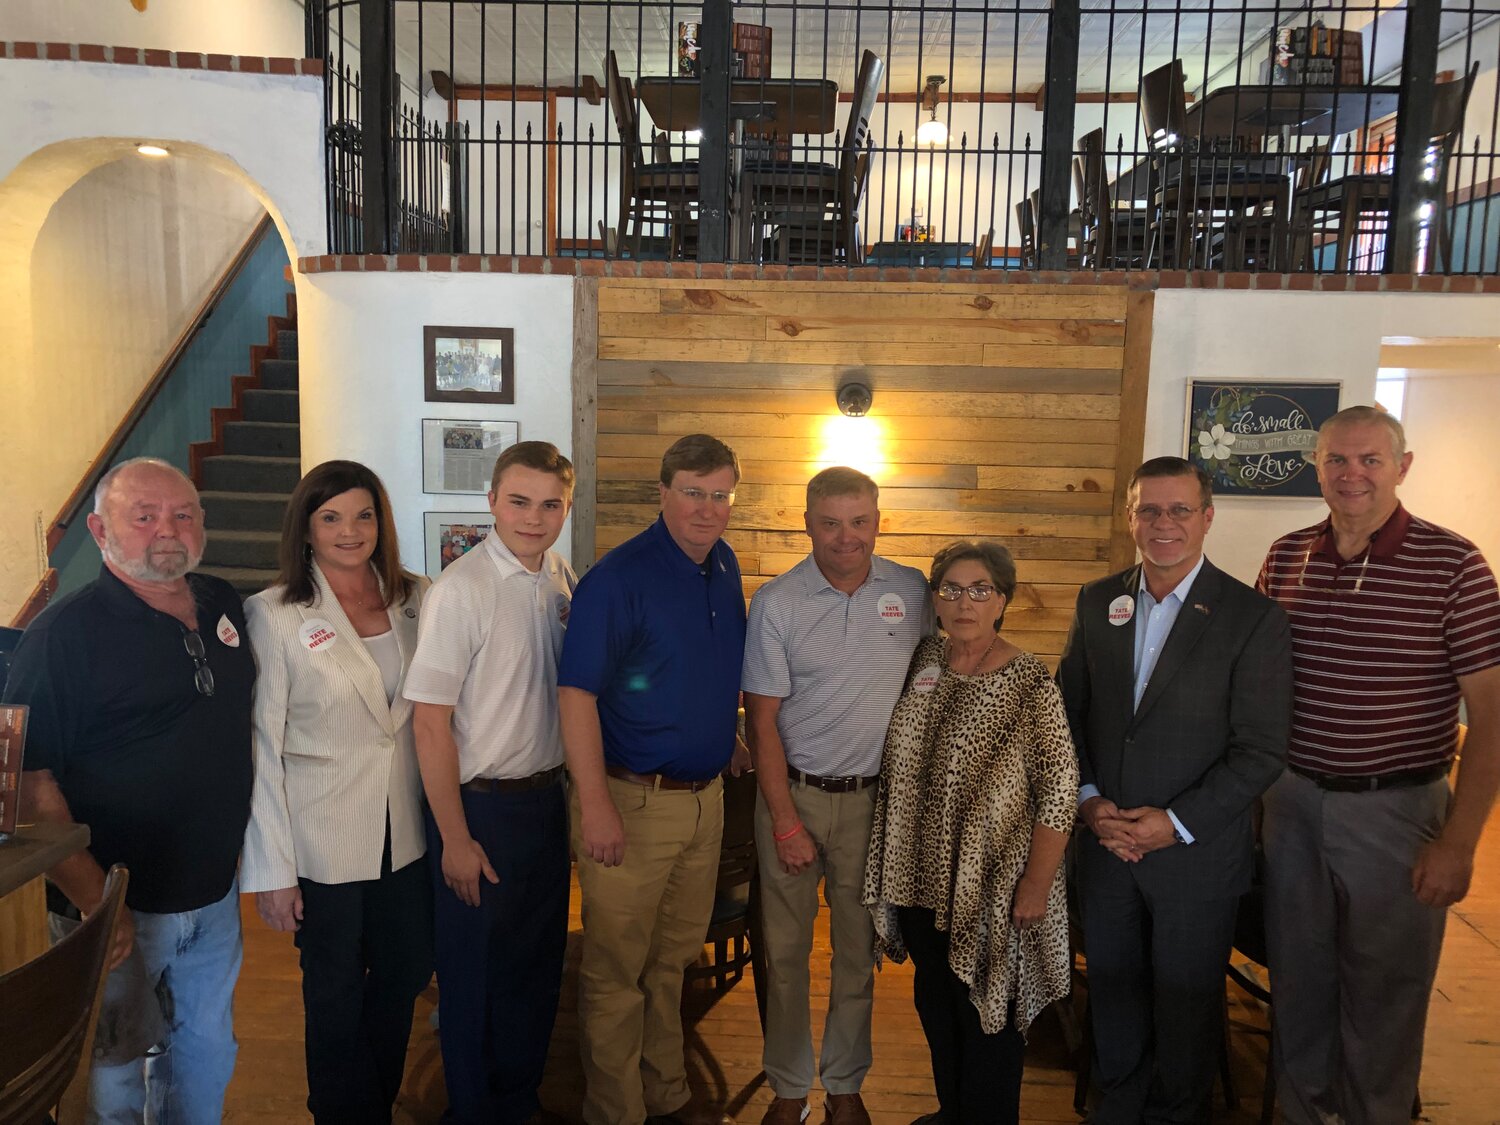 Left to right, Tishomingo County Republican Party Executive Committee Members Bill Kay, Melinda Whited, Noah Carpenter, Governor Tate Reeves, Representative Bubba Carpenter, Sheila Phifer, Belmont Alderman Ken Dulaney, Brian Grissom.